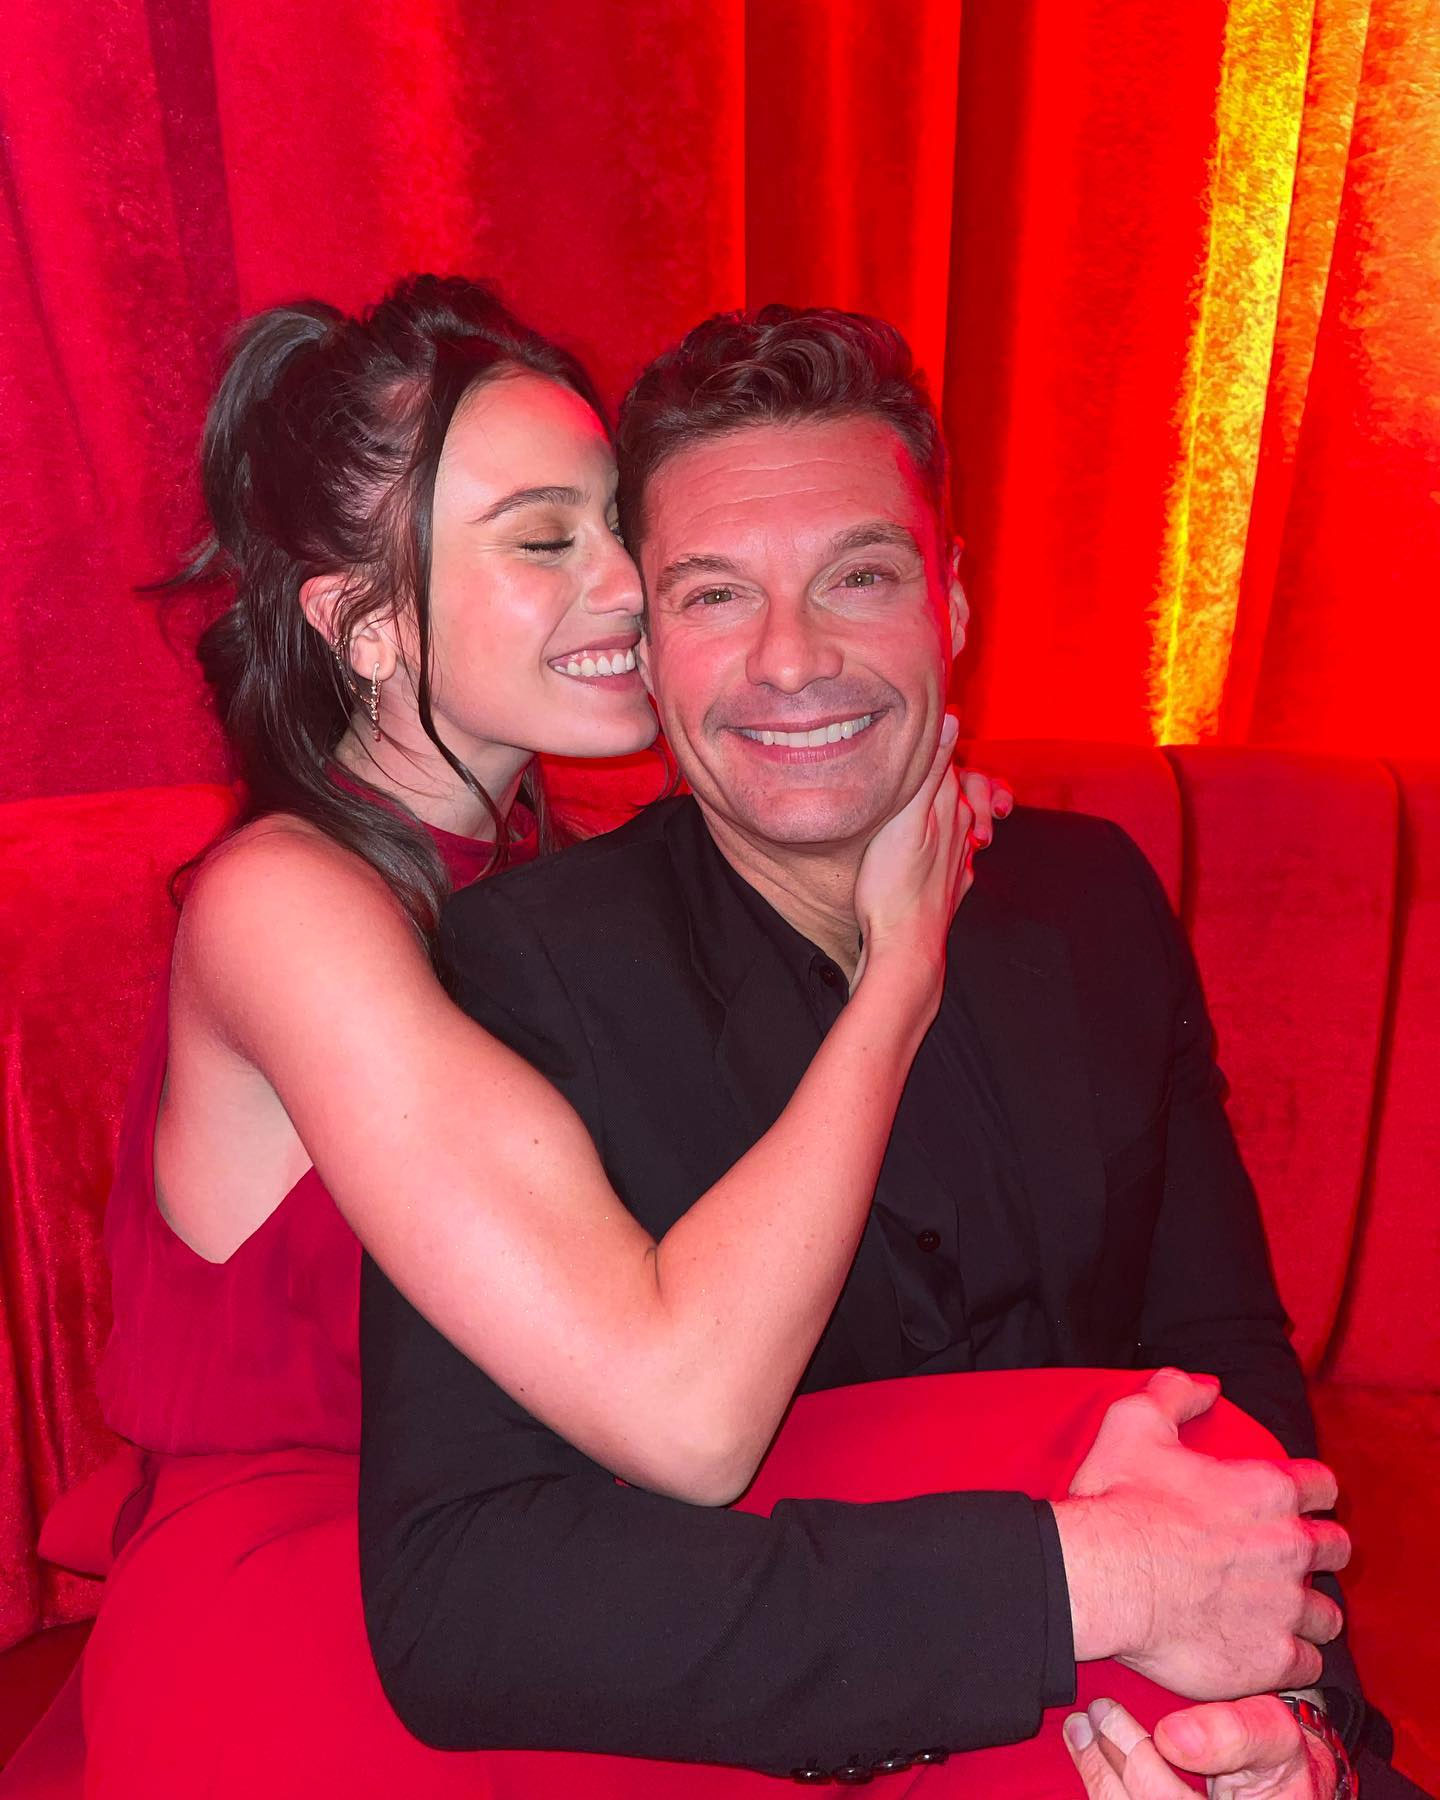 Who is Aubrey Paige Dating? Ryan Seacrest and Model Aubrey Paige Petcosky’s Relationship Timeline